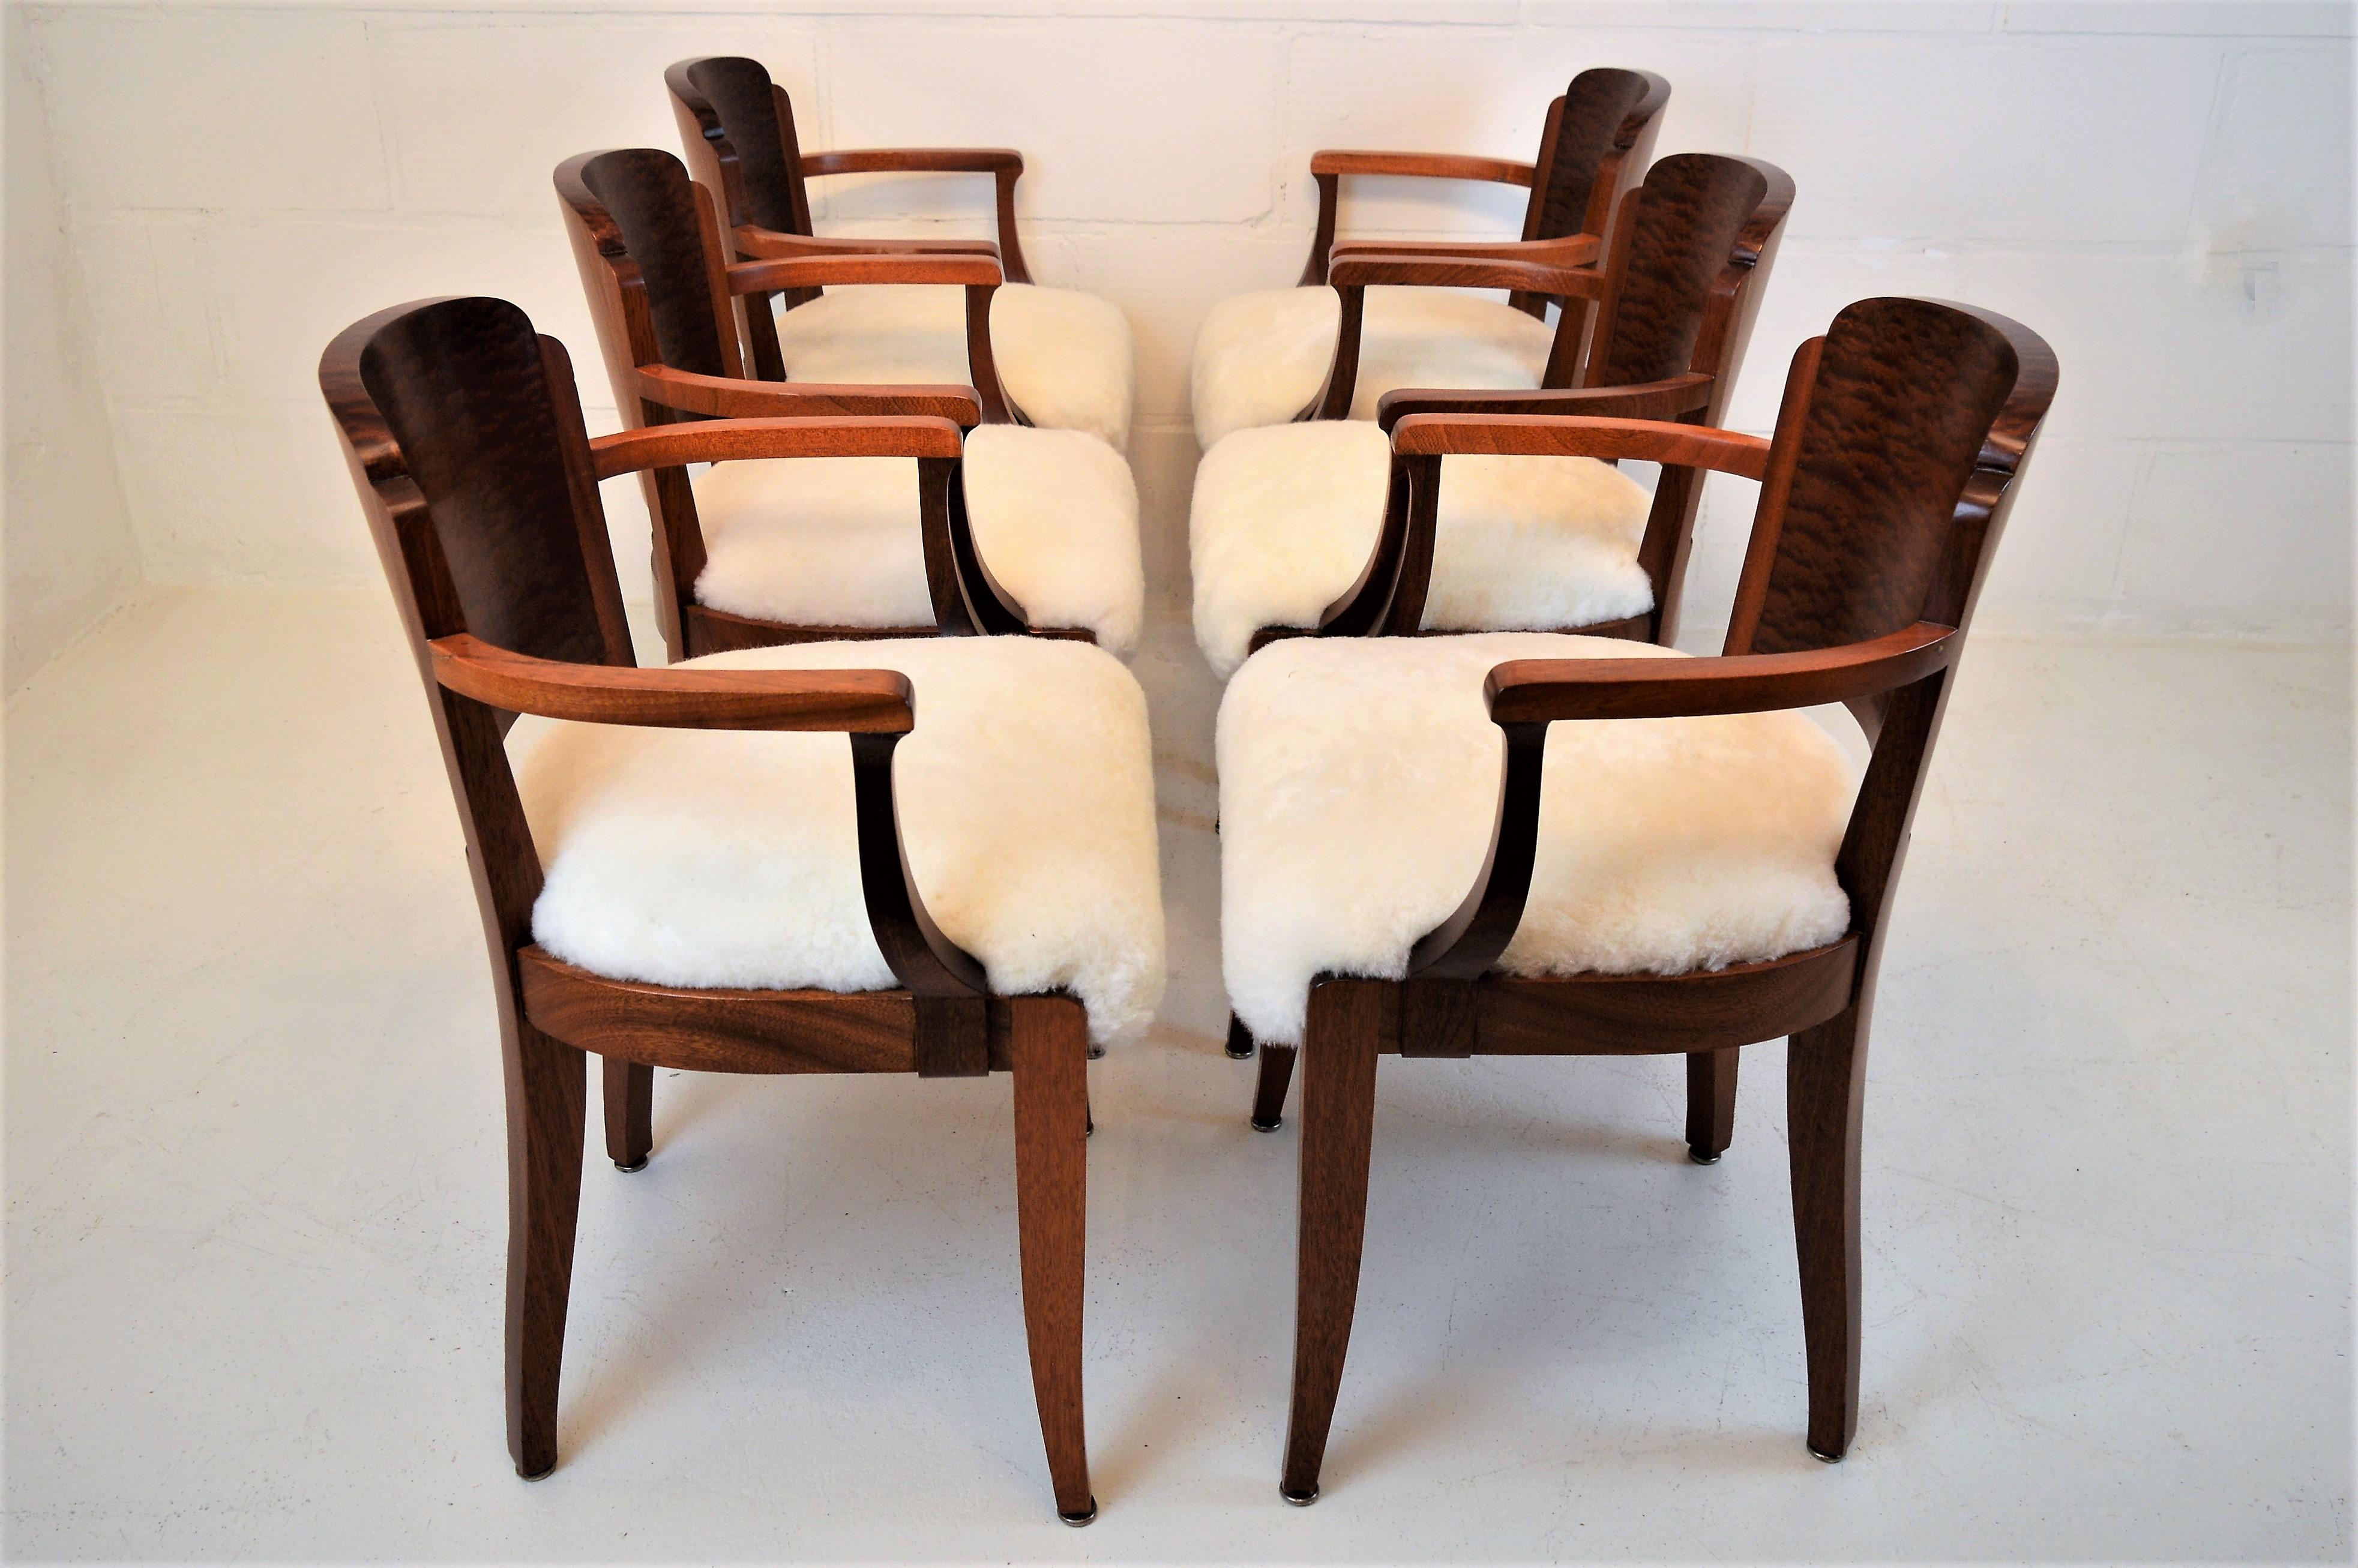 Six elegant armchairs, reupolstered with sheepskin. These solid mahogany chairs, with beautiful burl mahogany on the back-side, are created by the French designer Gaston Poisson in the early 1930s. The chairs are restored and finished in